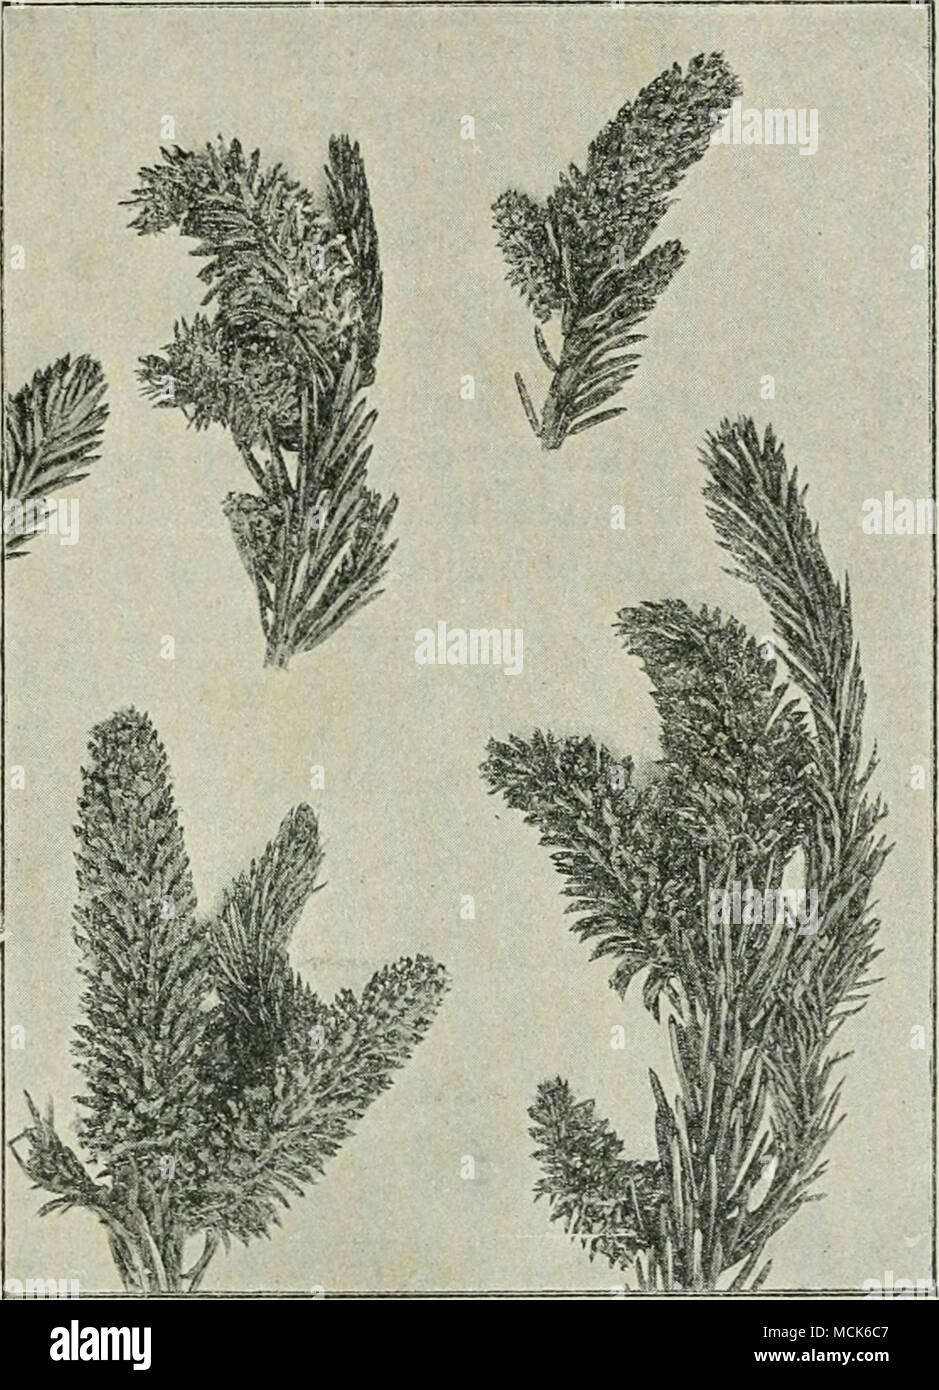 . Fig. 252.—Accidiuiii coruscans on malformed shoots of Spruce. The compact abnormal shoots thickly covered with white aecidia contrast strongly with the normal portions, (v. Tubeitf phot, from material presented by Prof. Fries, Upsala.) P. Engelmanni Thiim. On cones of Picea Smithiana. (U. S. America.) P. piceae Barcl. On needles of Picea Smithiana. P. Peckii Thiim. On needles of Tsuga canadensis (U.S. America). P. balsameum Peck. On needles of Abies halsamea (U.S. America). P. ephedrae Cooke. On Ephedra in U.S. America. P. cedri Barcl. On needles of Cedrus Deodara in India. P. Balansae Corn. Stock Photo